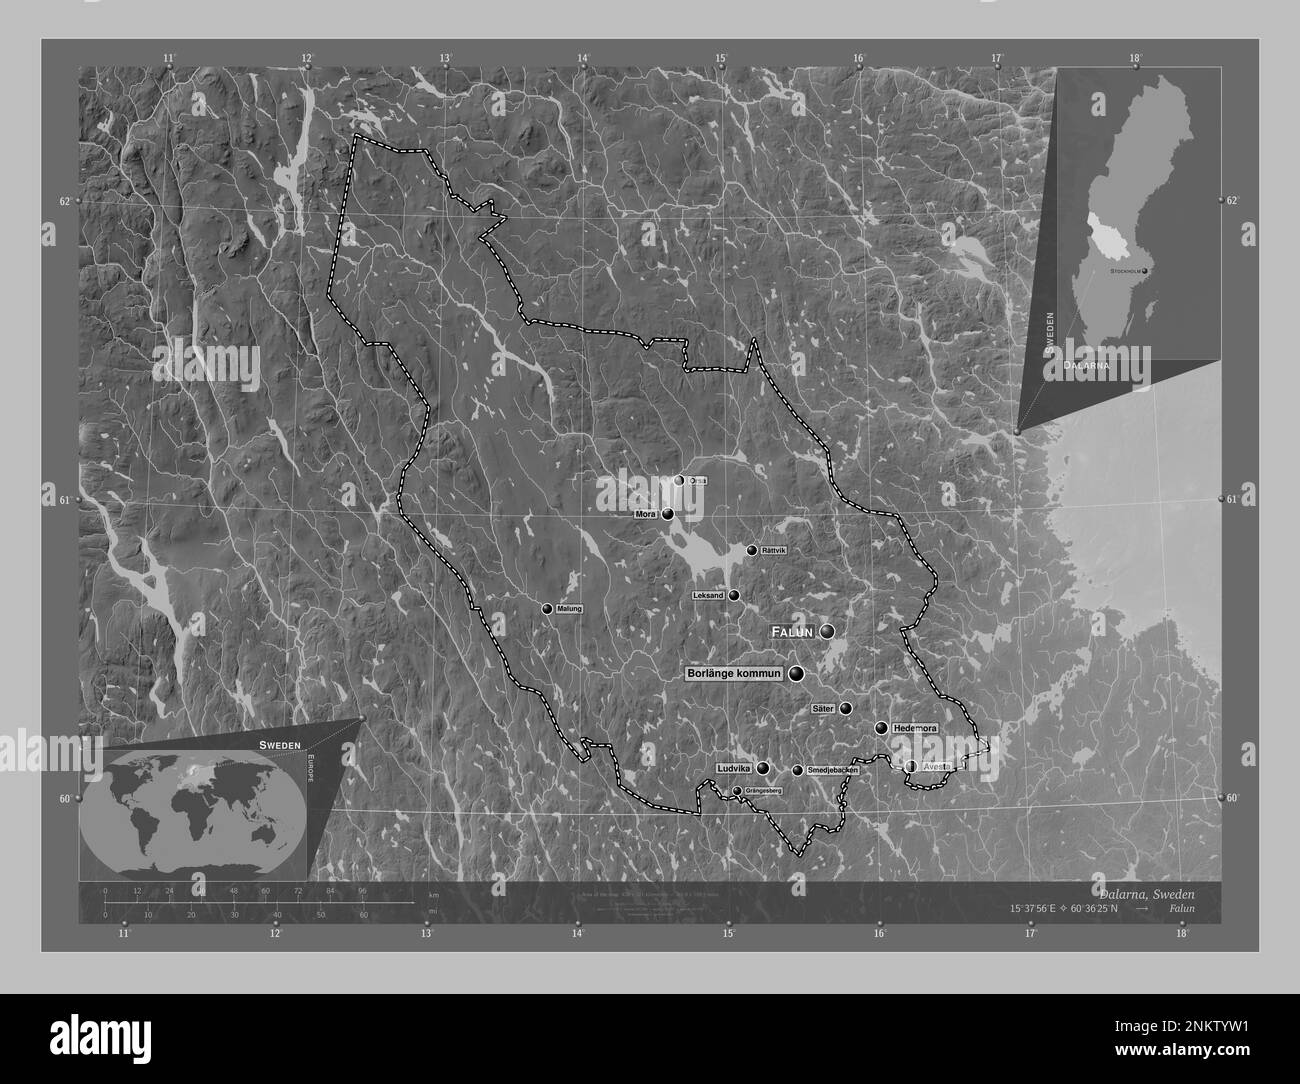 Dalarna, county of Sweden. Grayscale elevation map with lakes and rivers. Locations and names of major cities of the region. Corner auxiliary location Stock Photo